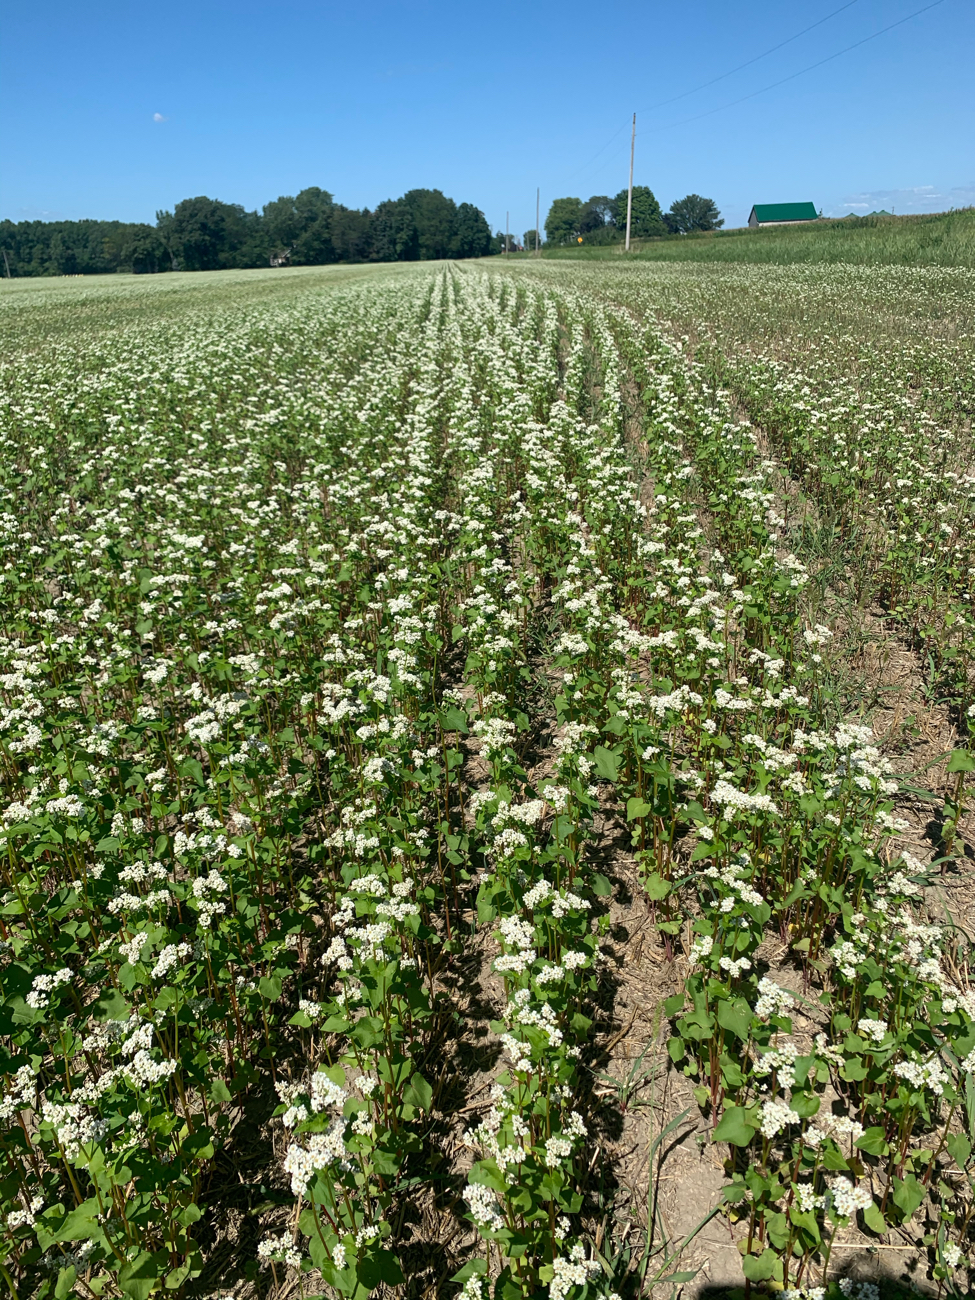 White flowers emerging on buckwheat cover crop. Buckwheat is great for pollinators! September 2021